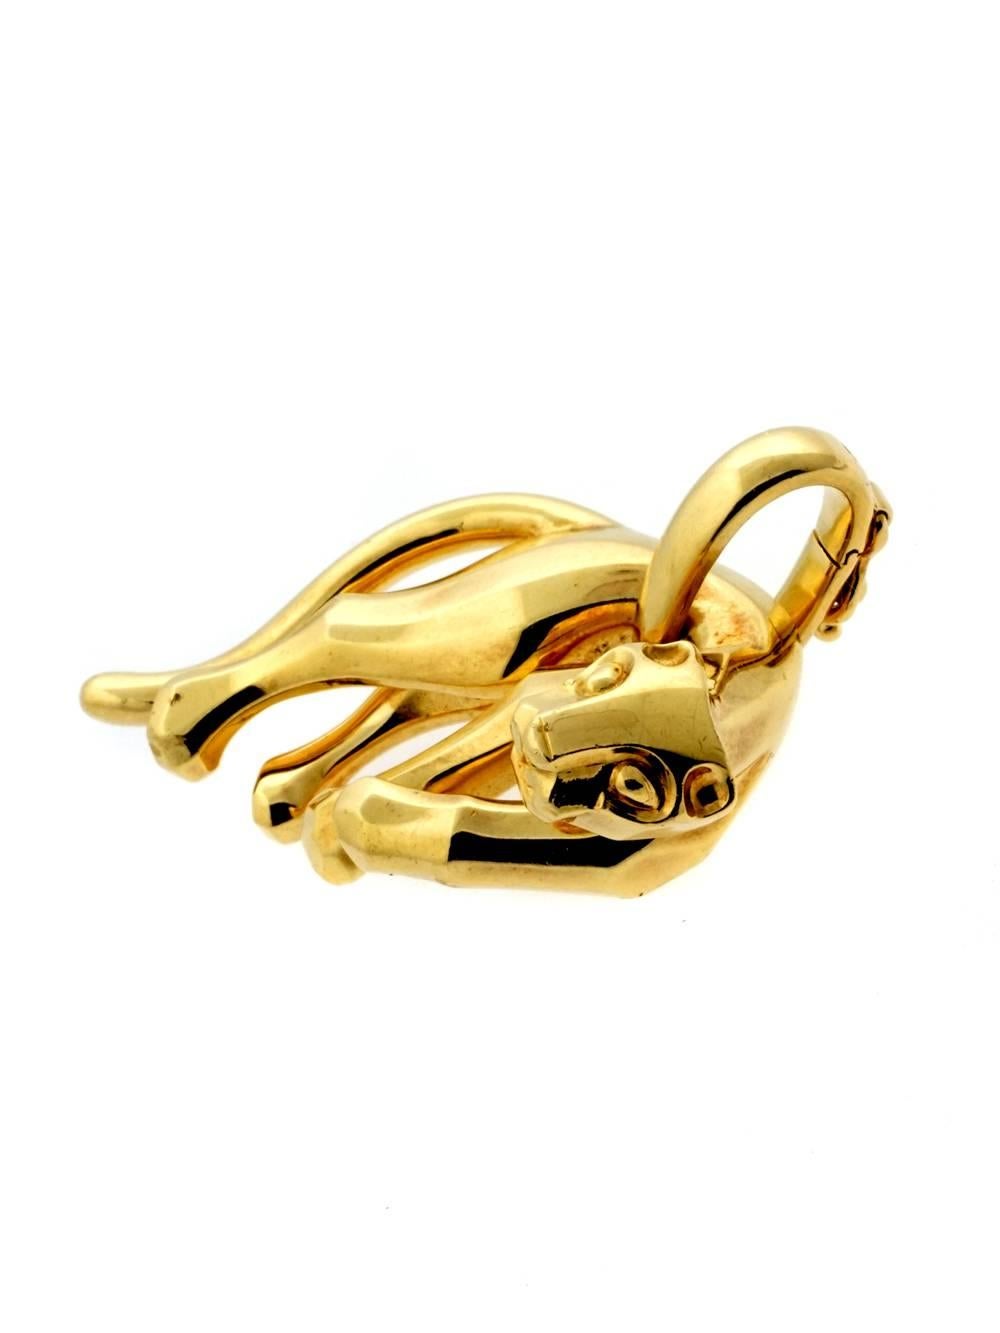 A magnificent Cartier 18k yellow gold Panthere pendant precisely molded gently swooping tail and lithe design.

Weight: 20.5 Grams
Dimensions: 1.14″ Inches wide by 1.18″ Inches in length

Inventory ID: 0000098